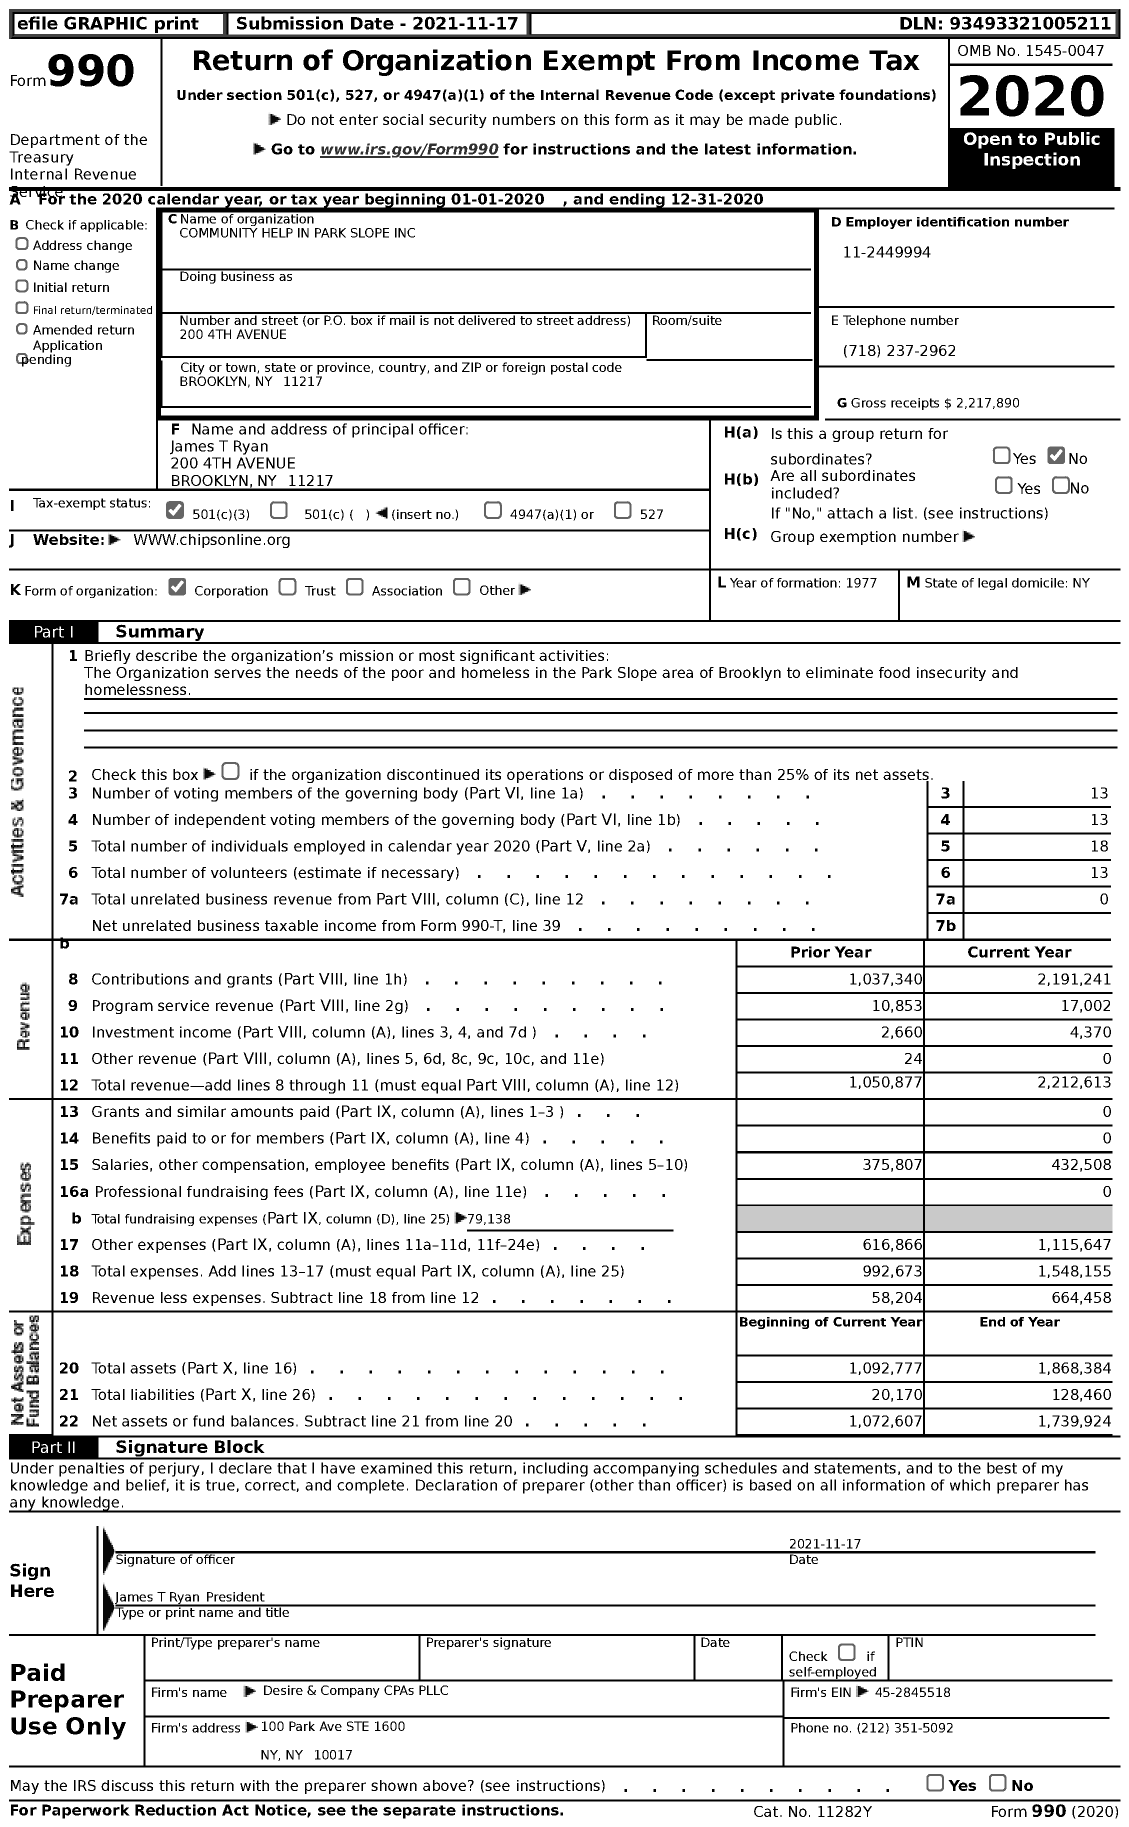 Image of first page of 2020 Form 990 for Community Help in Park Slope (CHIPS)